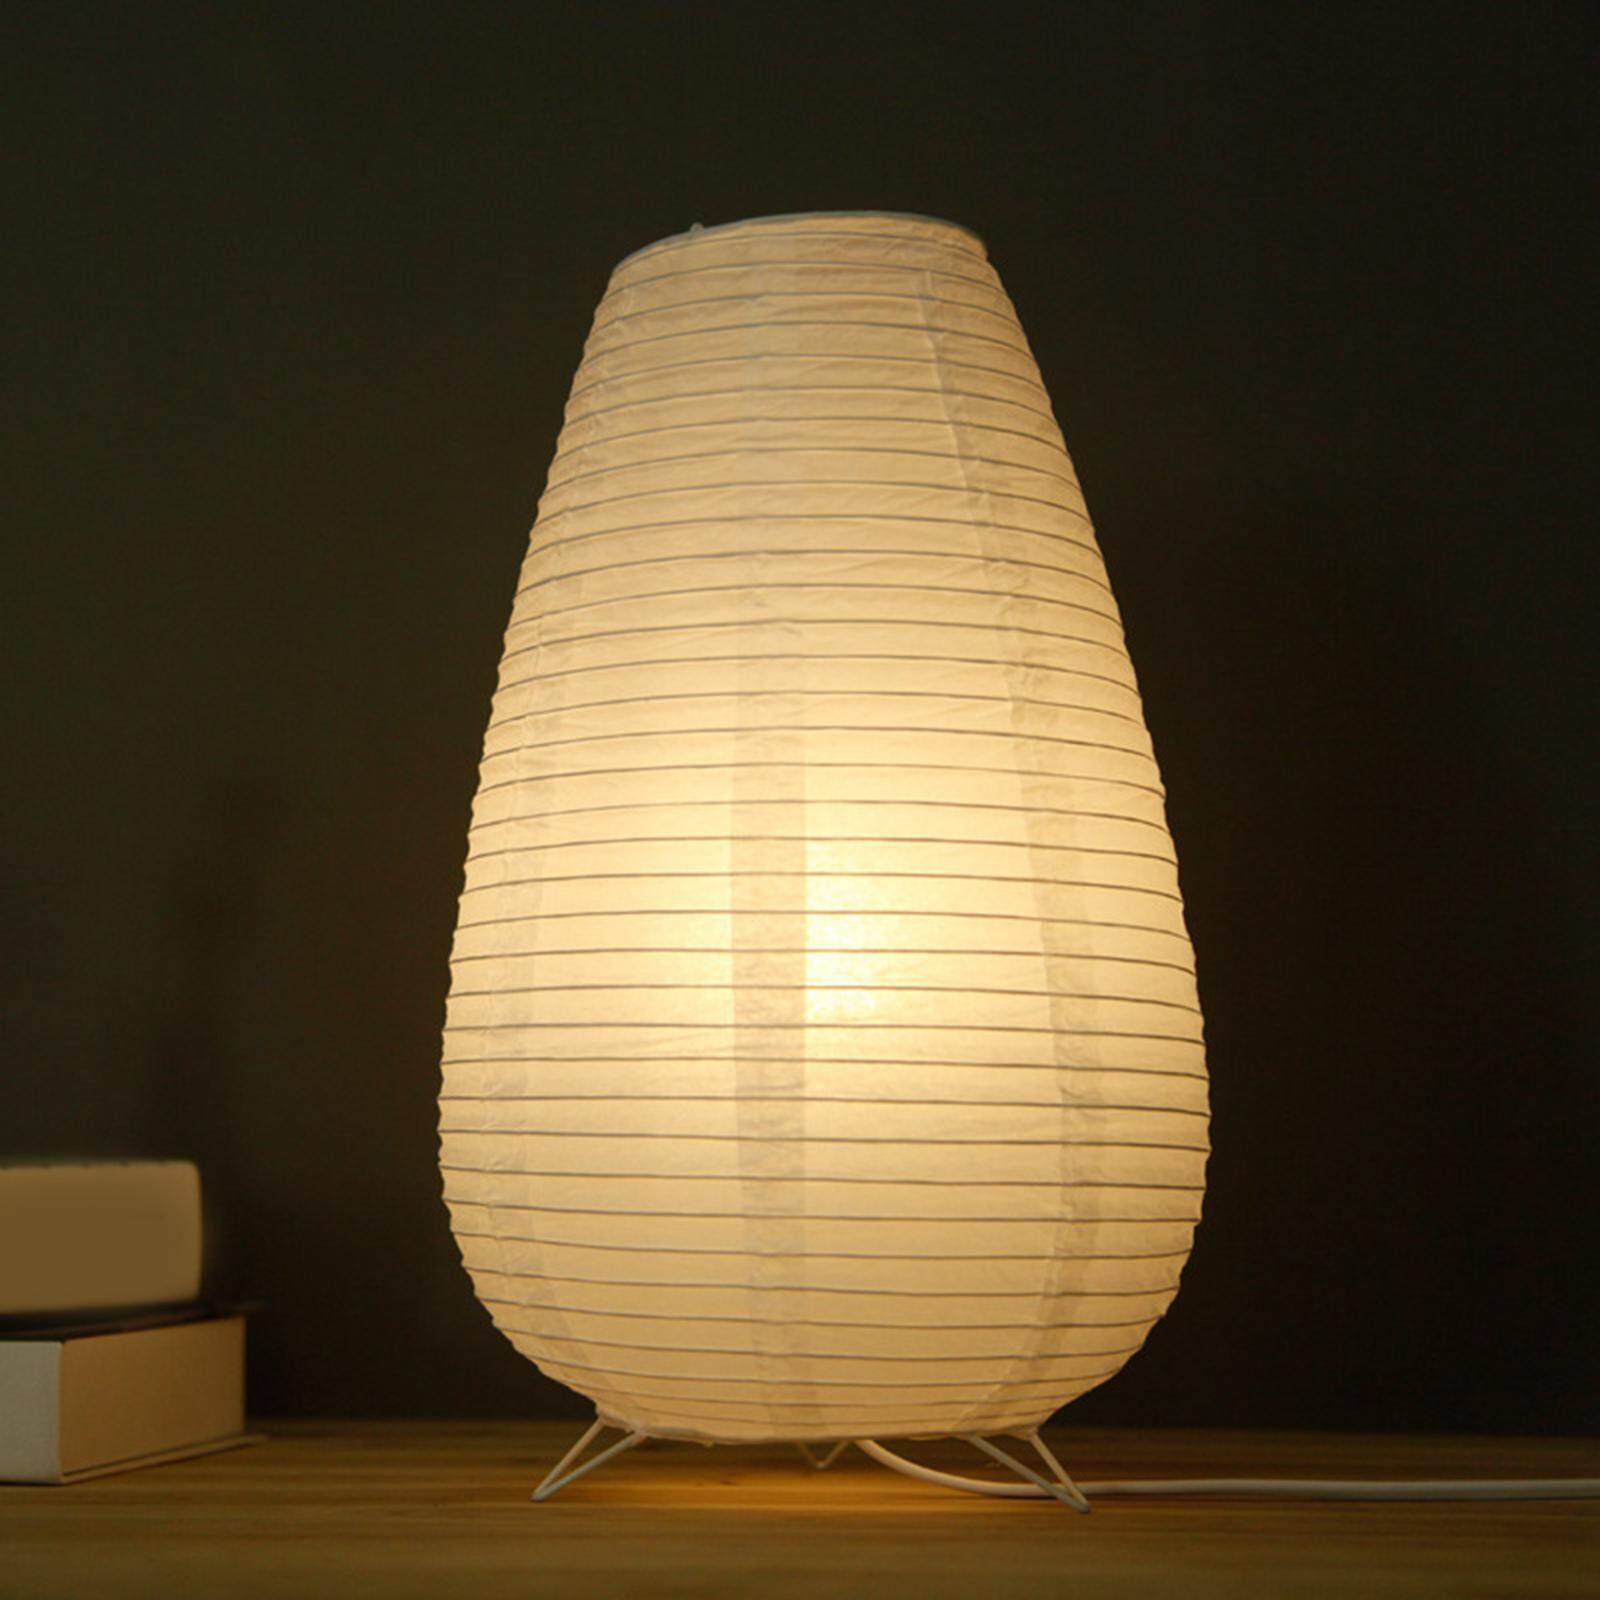 Paper Lantern Desk Lamp Japanese Bedroom Bedside Night Light, Home Decorations Creative Paper Lampshade Table Lamp